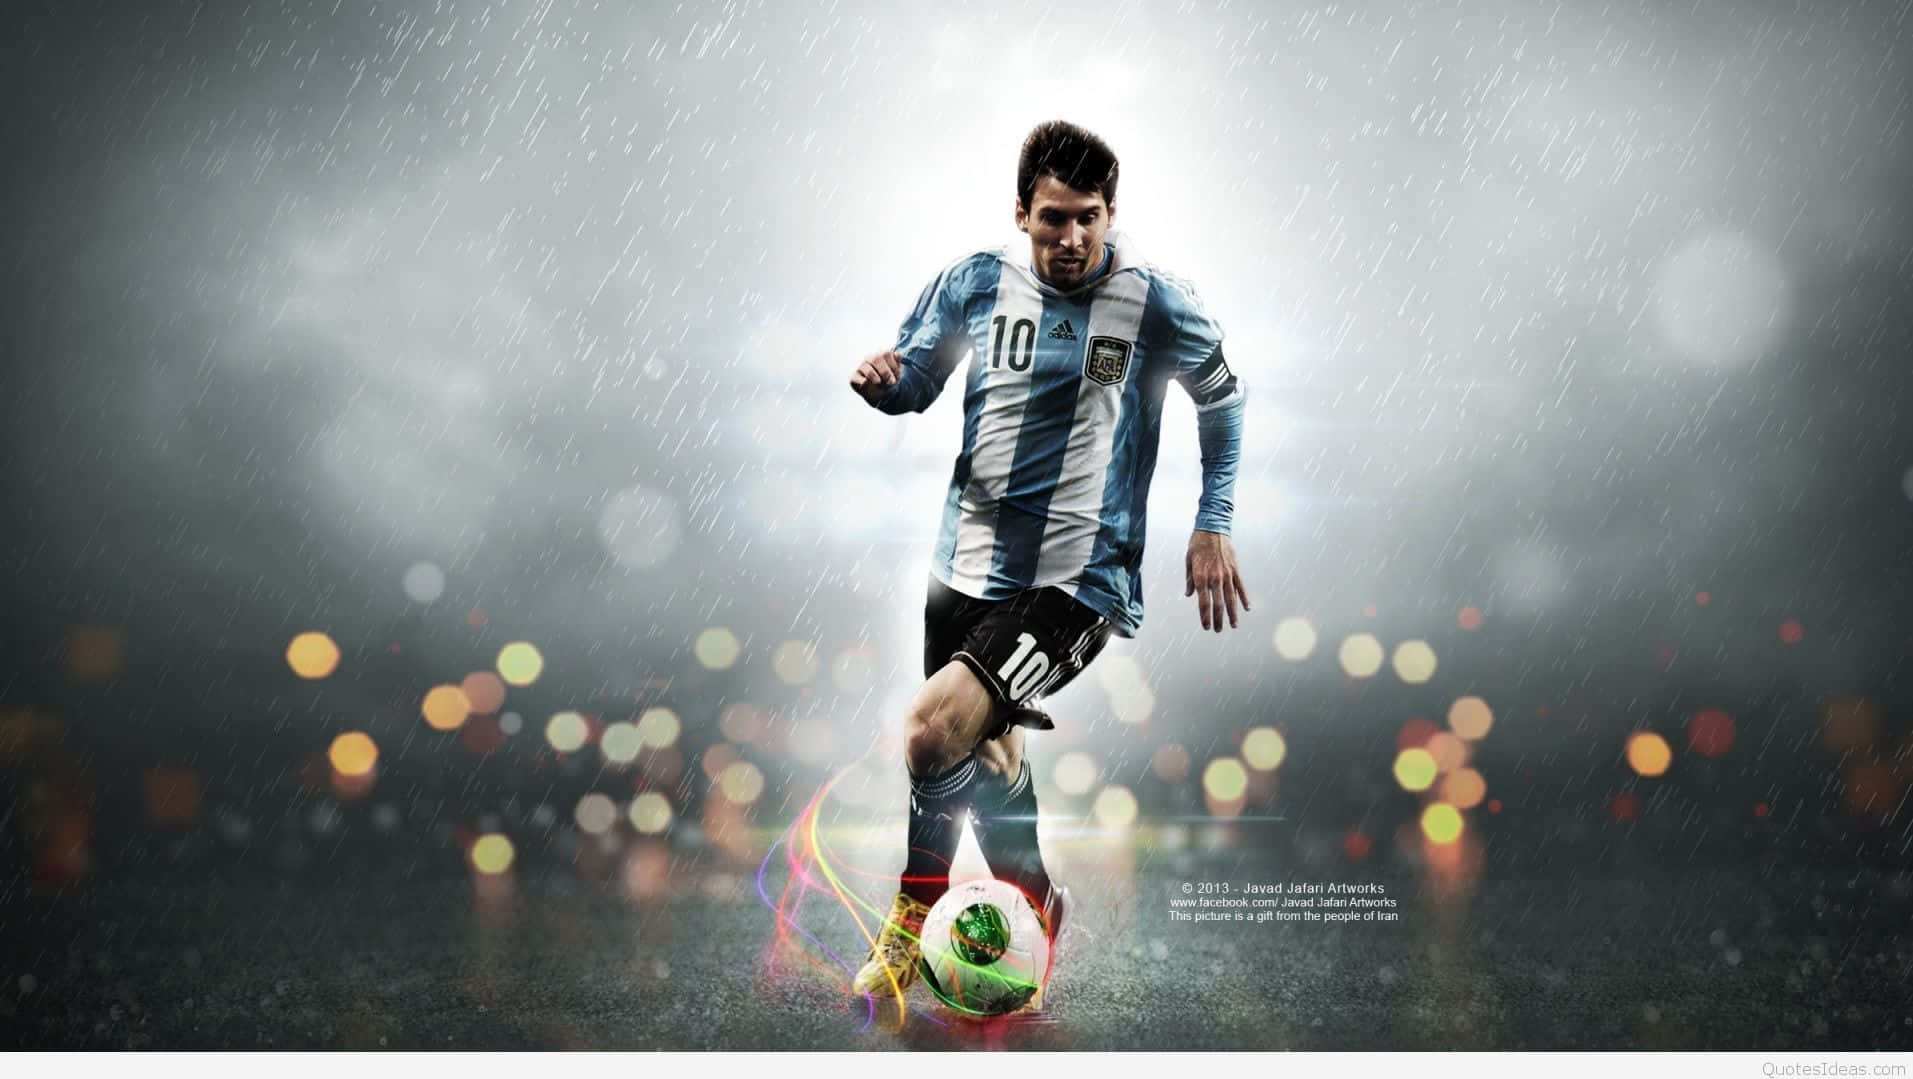 A Soccer Player Is Kicking A Ball In The Rain Wallpaper